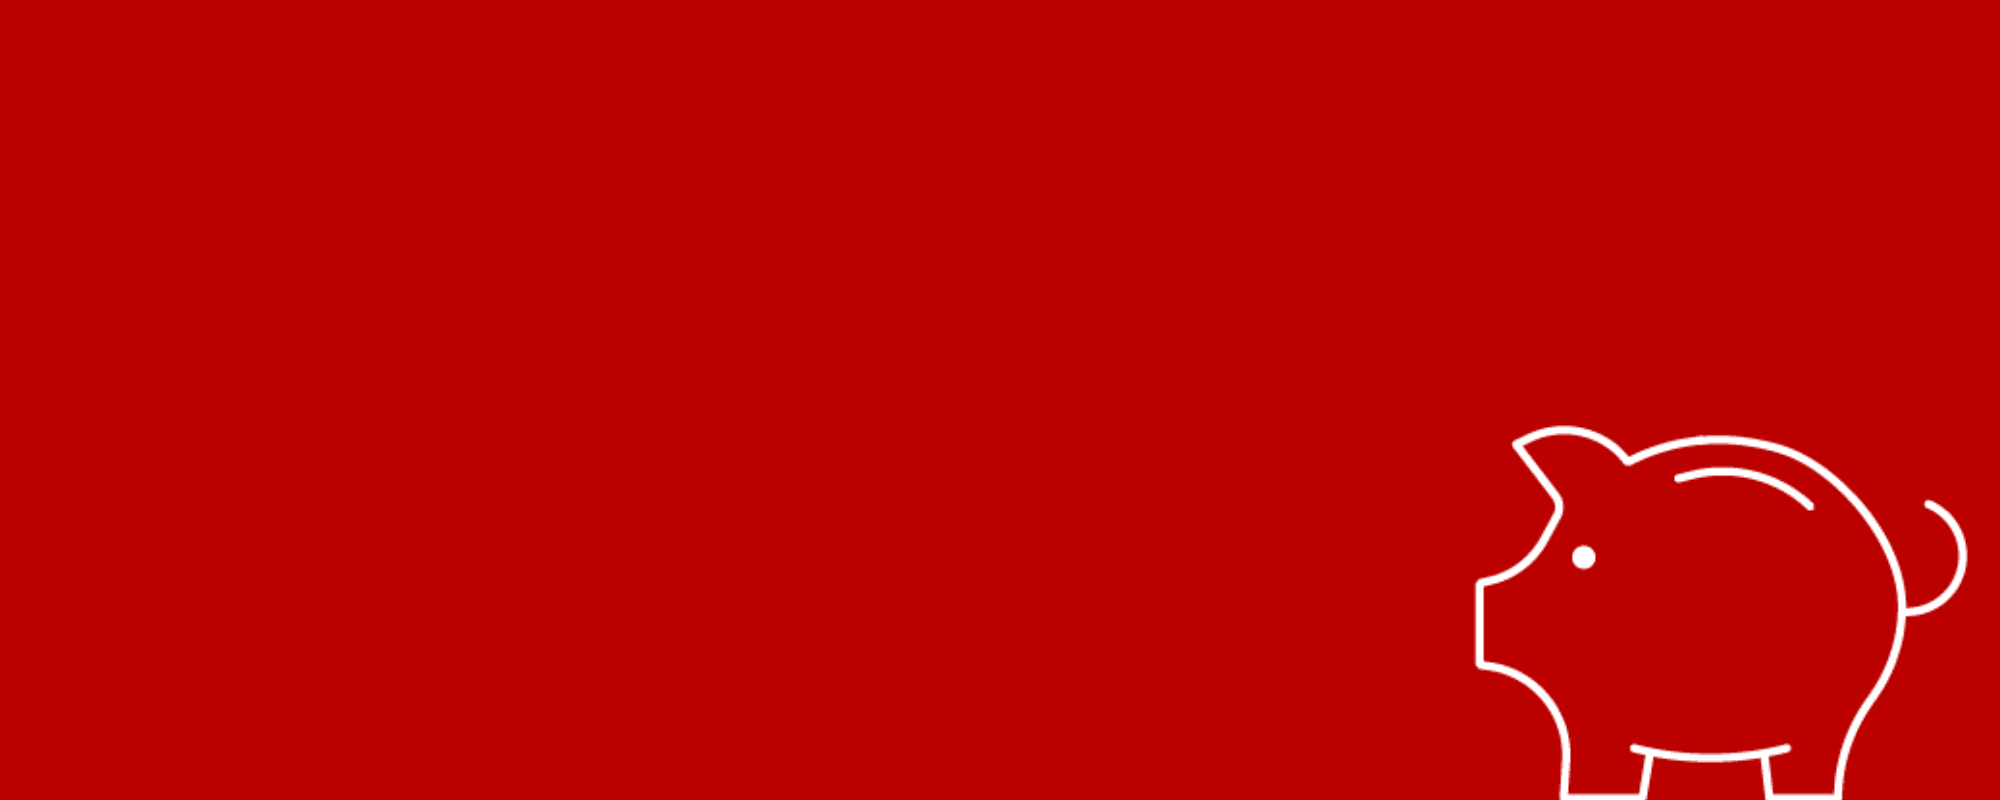 A white outline icon of a pig on a red background